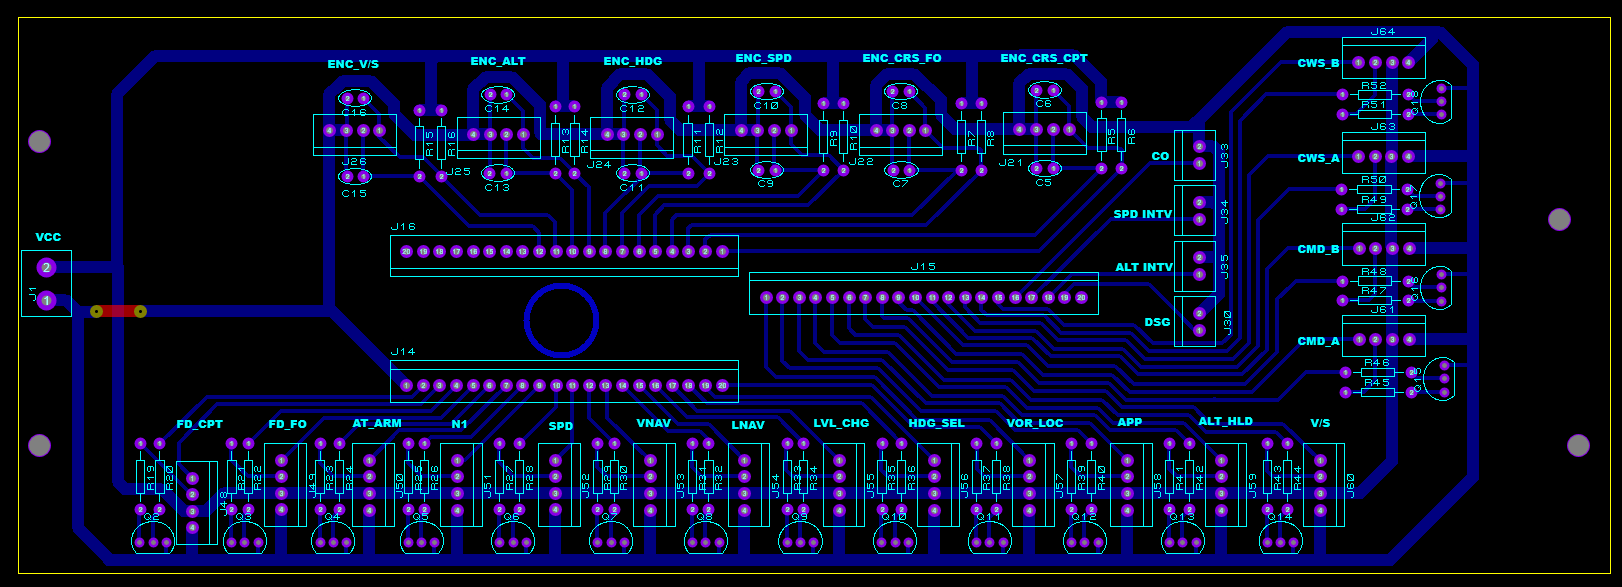 BUTTON & LED & sWITCH & ENCODER MAINBOARSD PCB.png